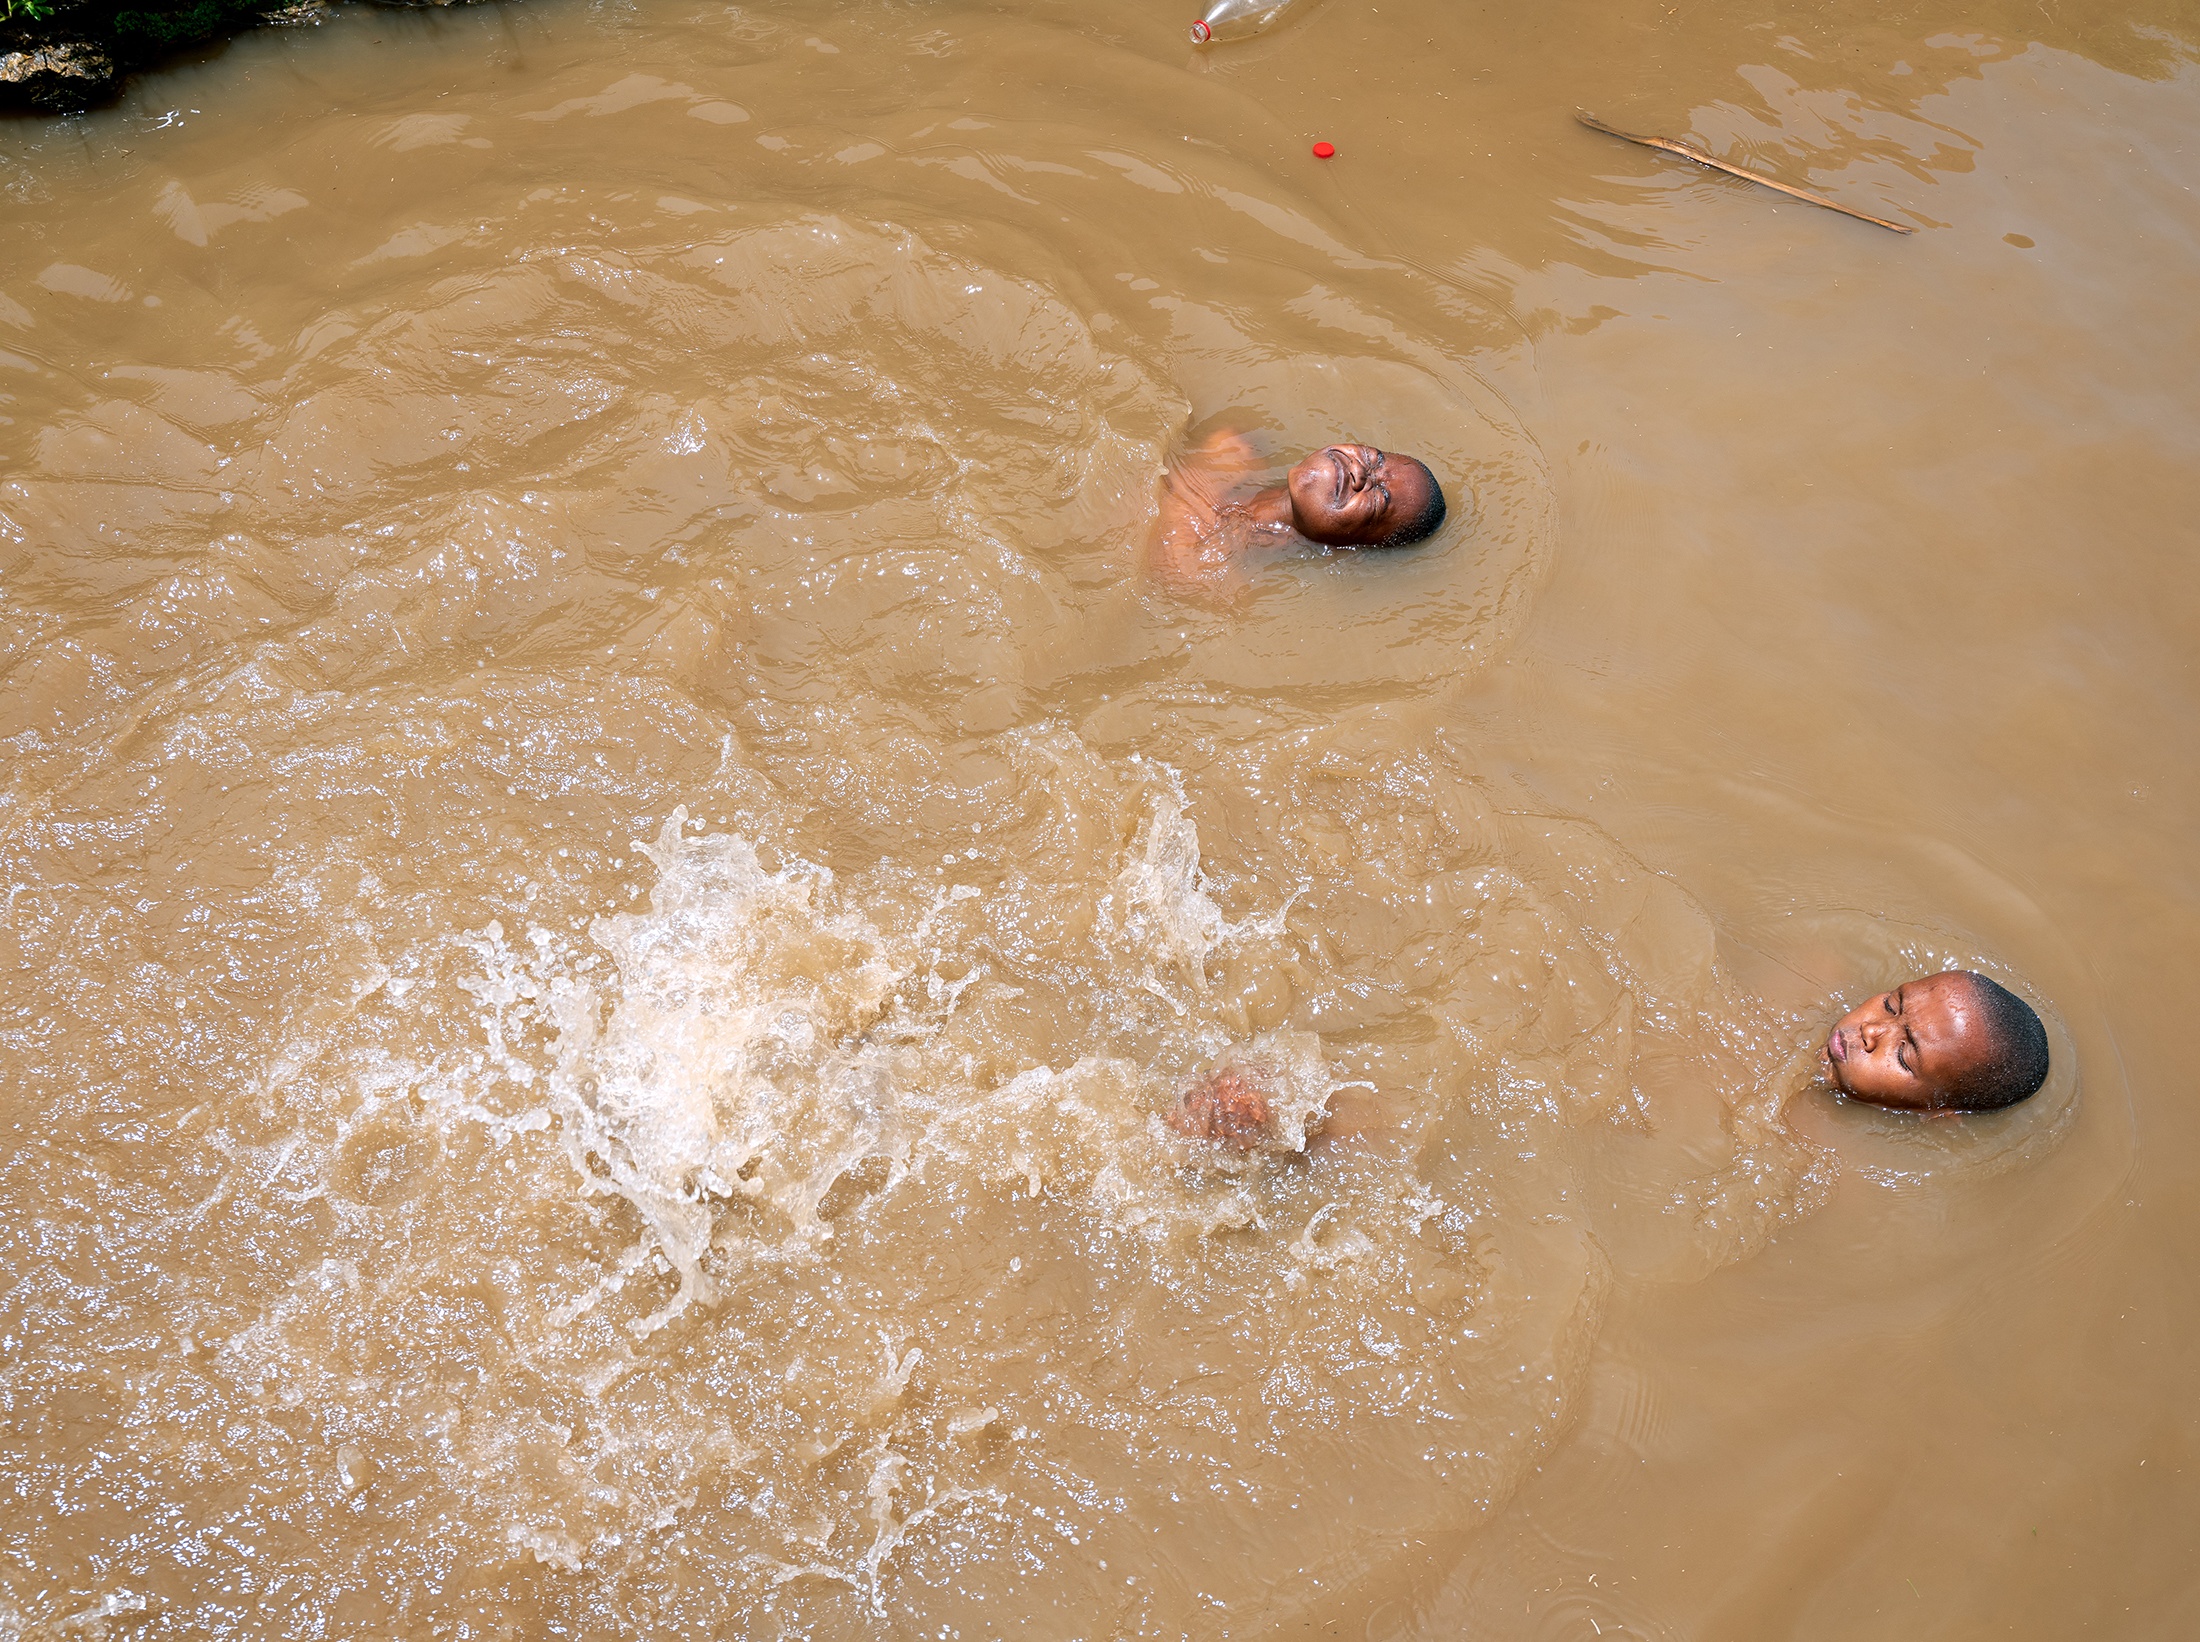 Lindokuhle Sobekwa's photograph 'Tsojana river' shows two children swimming in muddy water.
